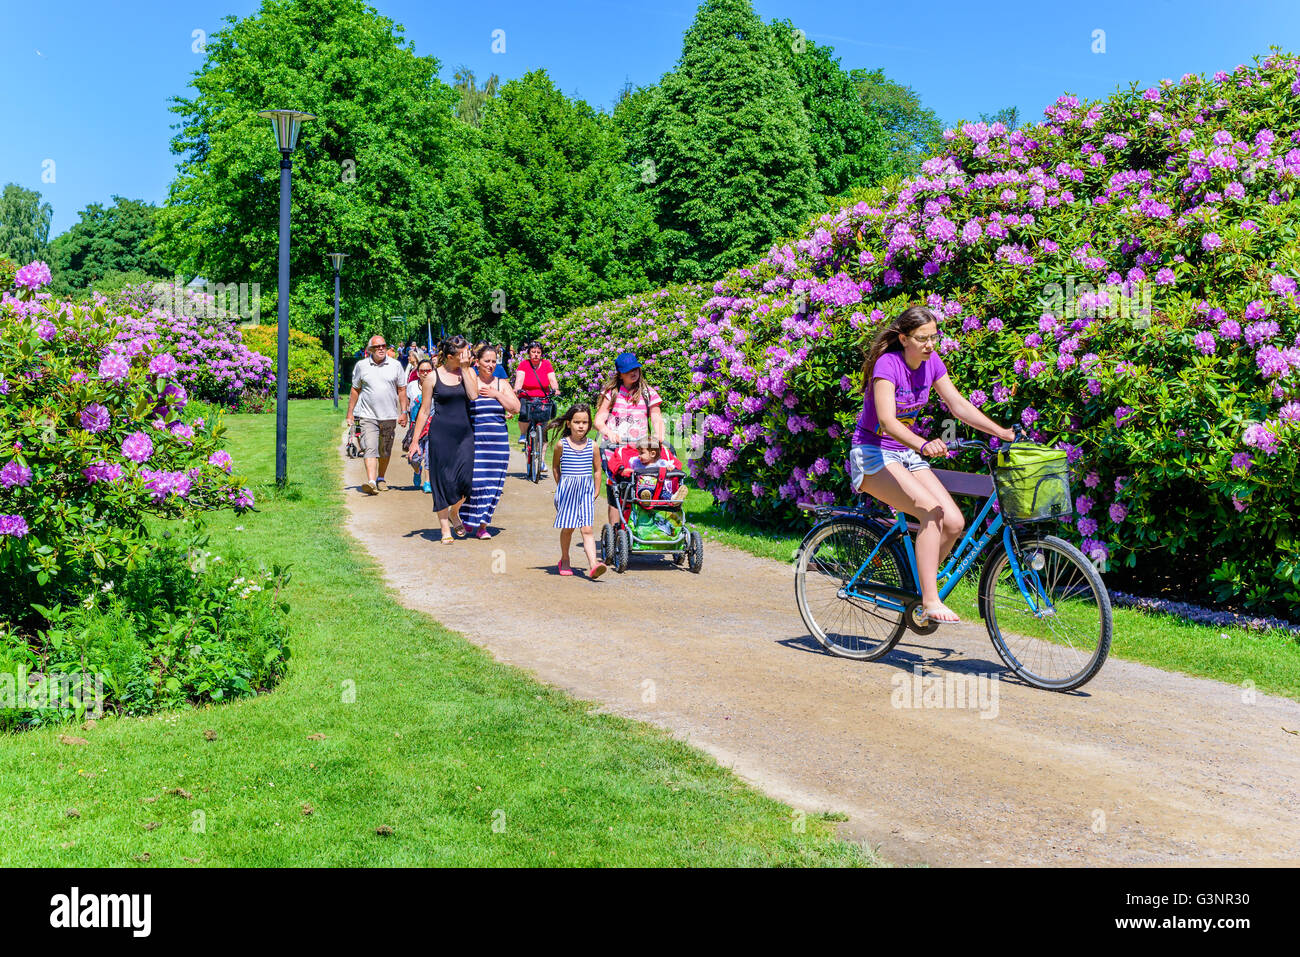 Ronneby, Sweden - June 6, 2016: The Swedish national day celebration in public park. People walking and cycling on a gravel path Stock Photo